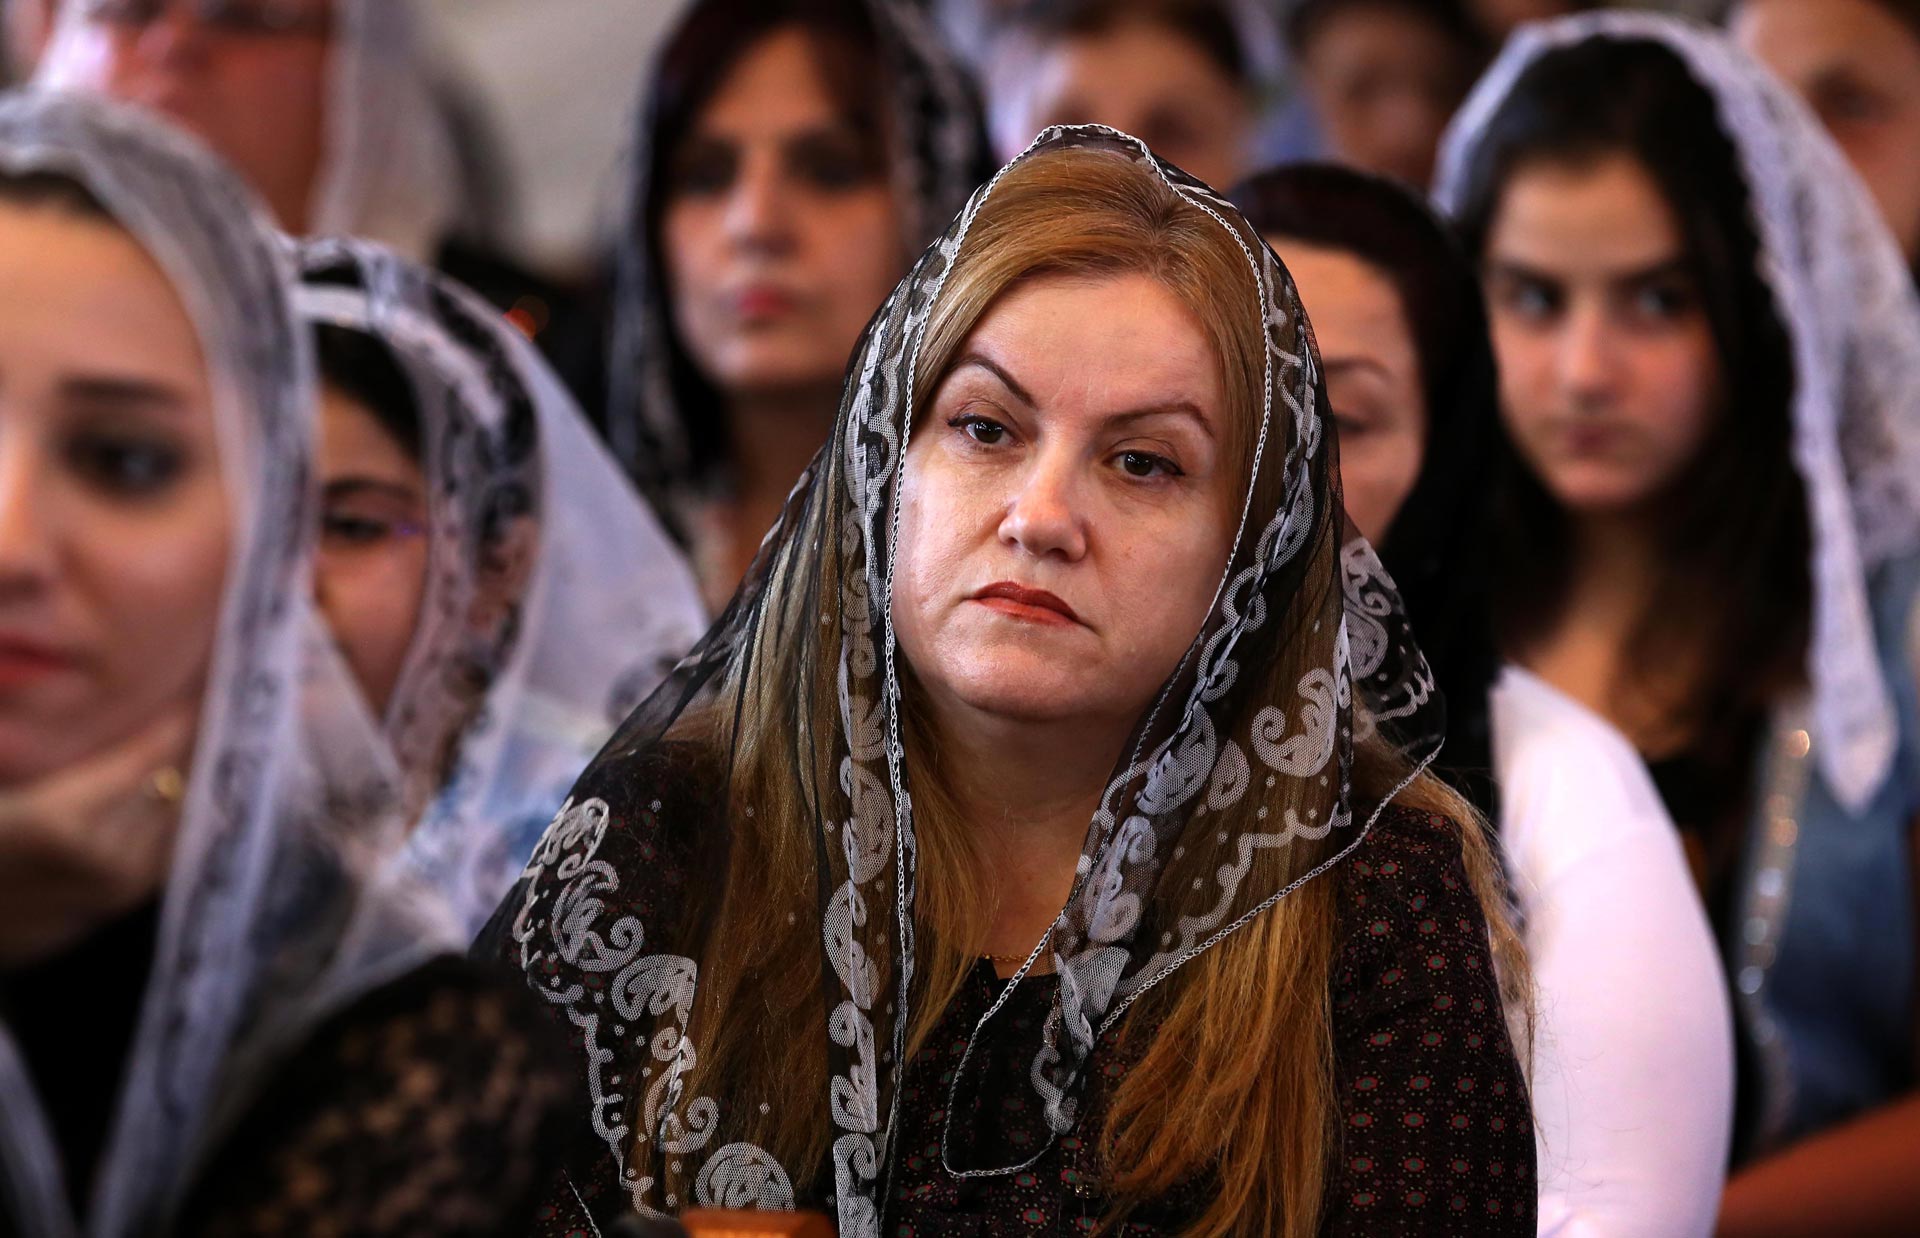 Iraqi Assyrian Christians attend a ceremony at Saint Youhanna church in Arbil, the capital of the autonomous Kurdish region of northern Iraq on September 18, 2015.